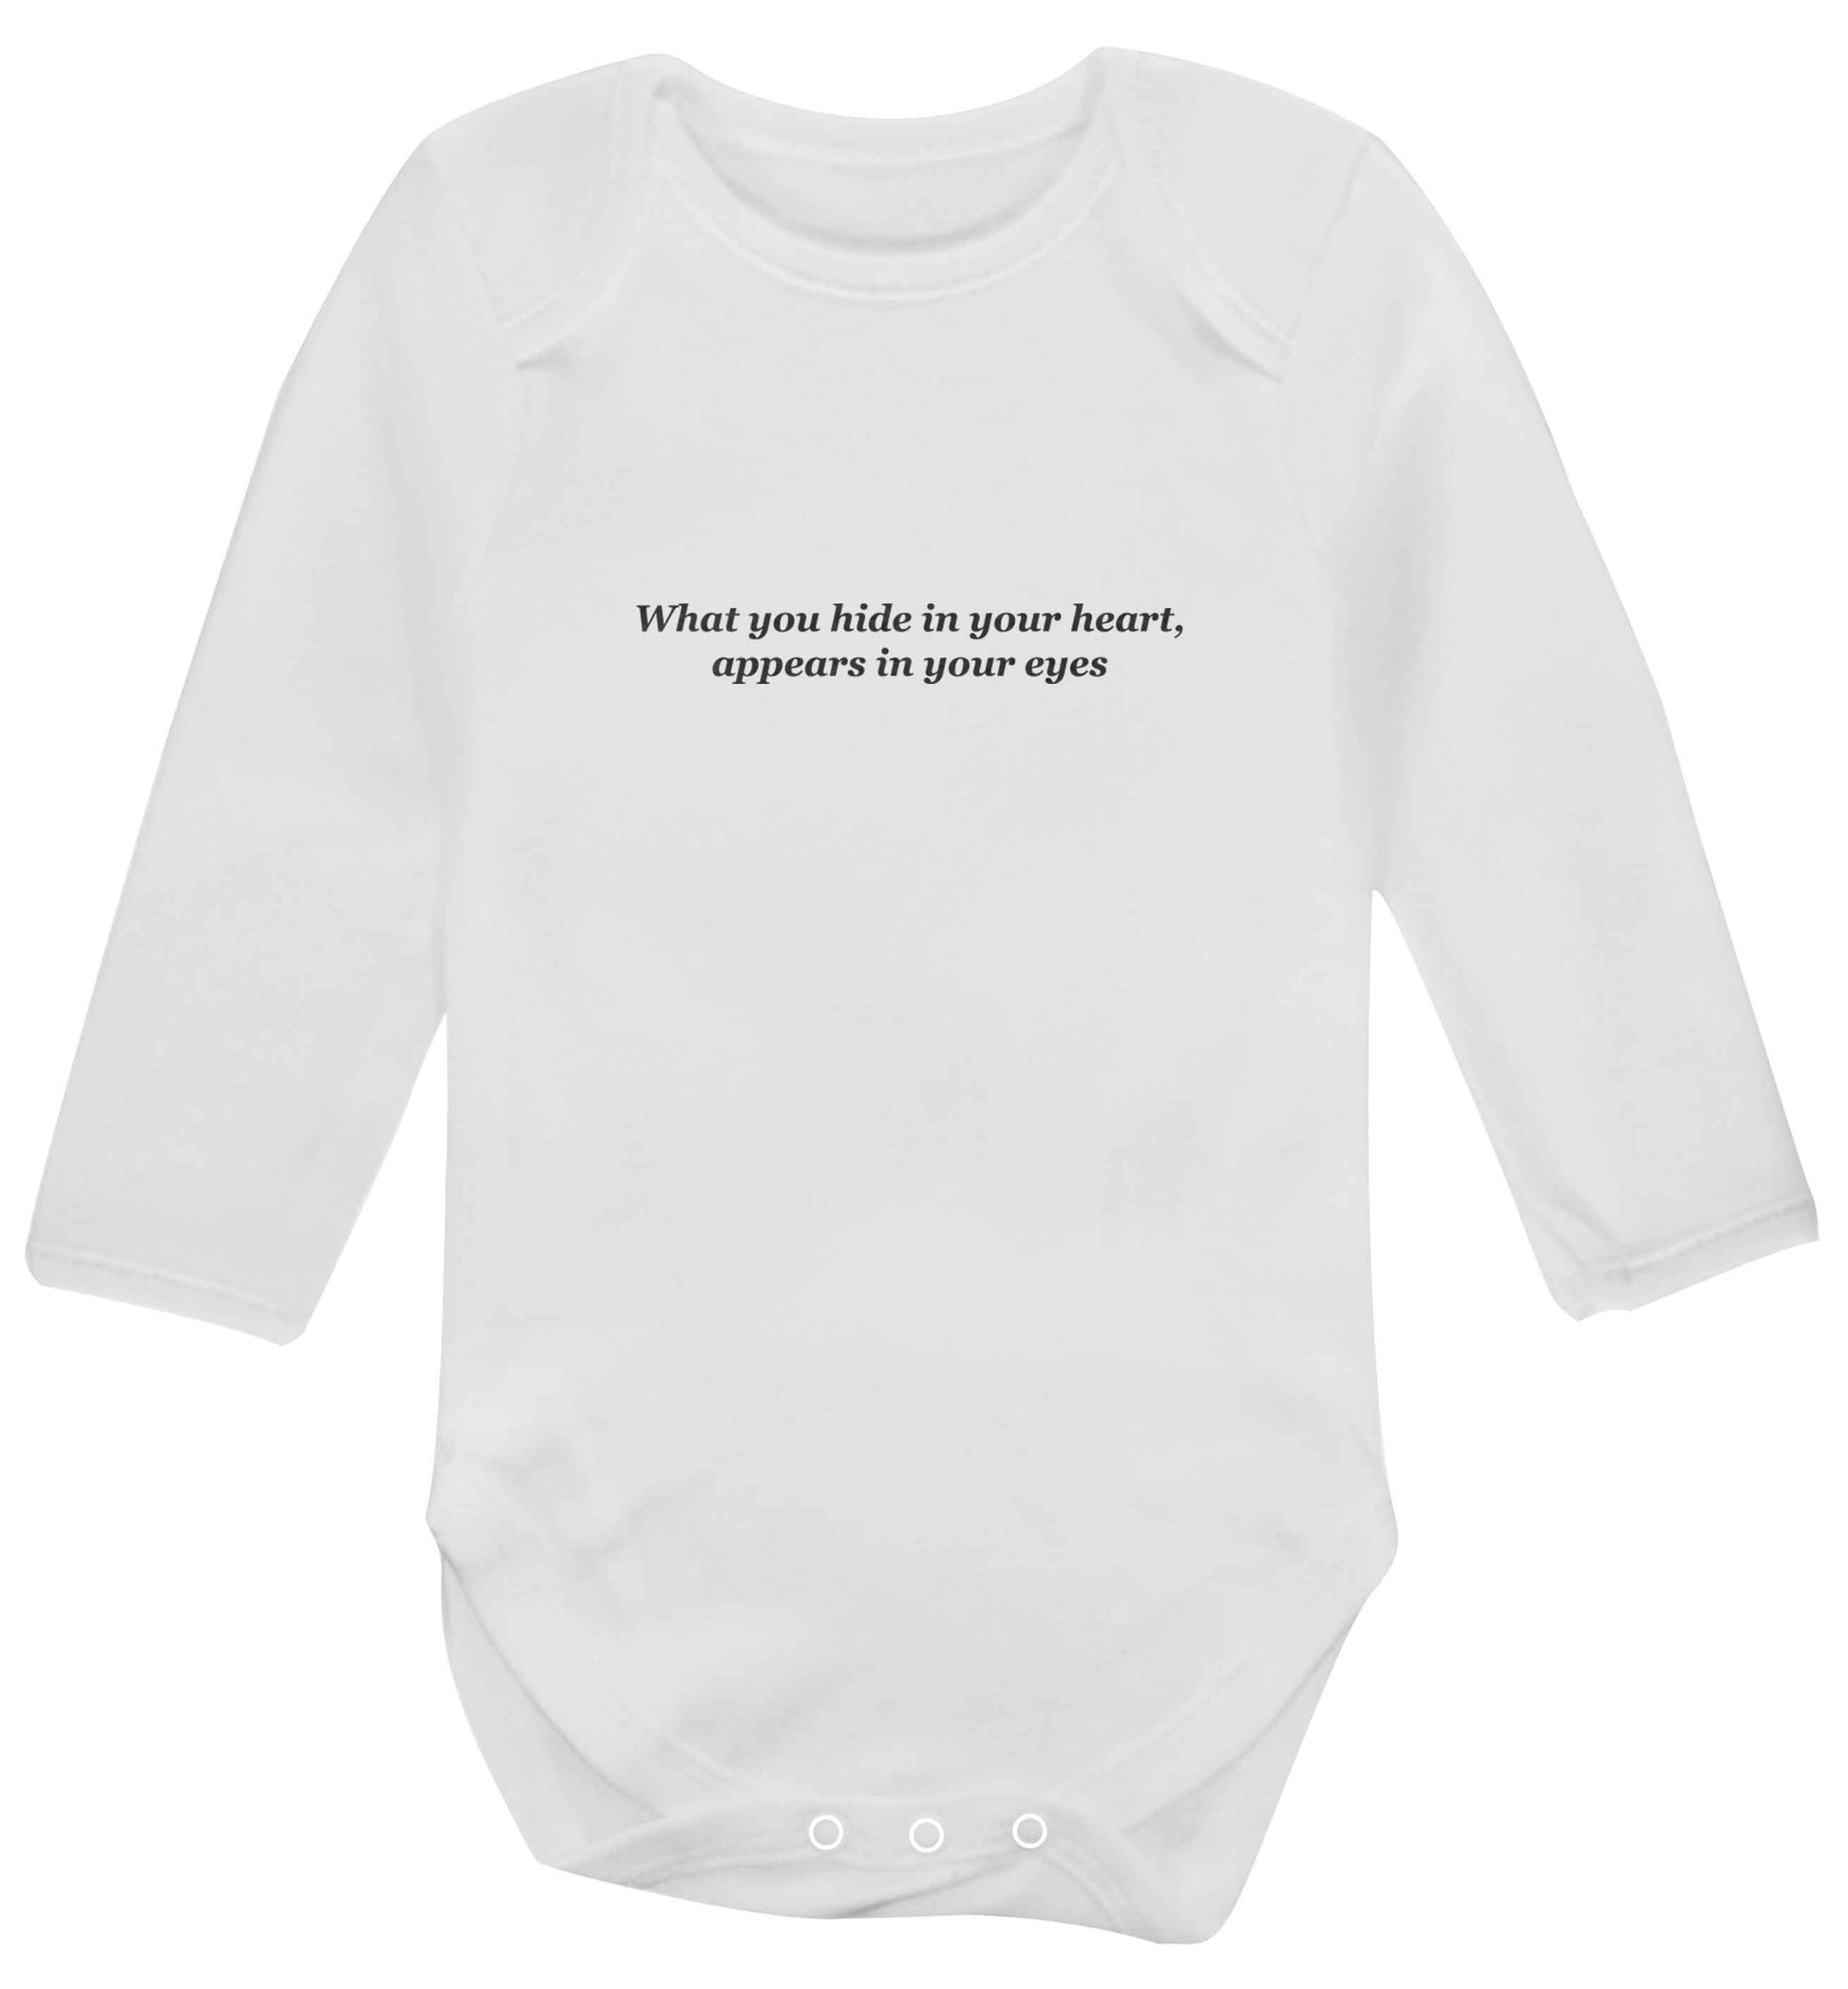 What you hide in your heart, appears in your eyes baby vest long sleeved white 6-12 months